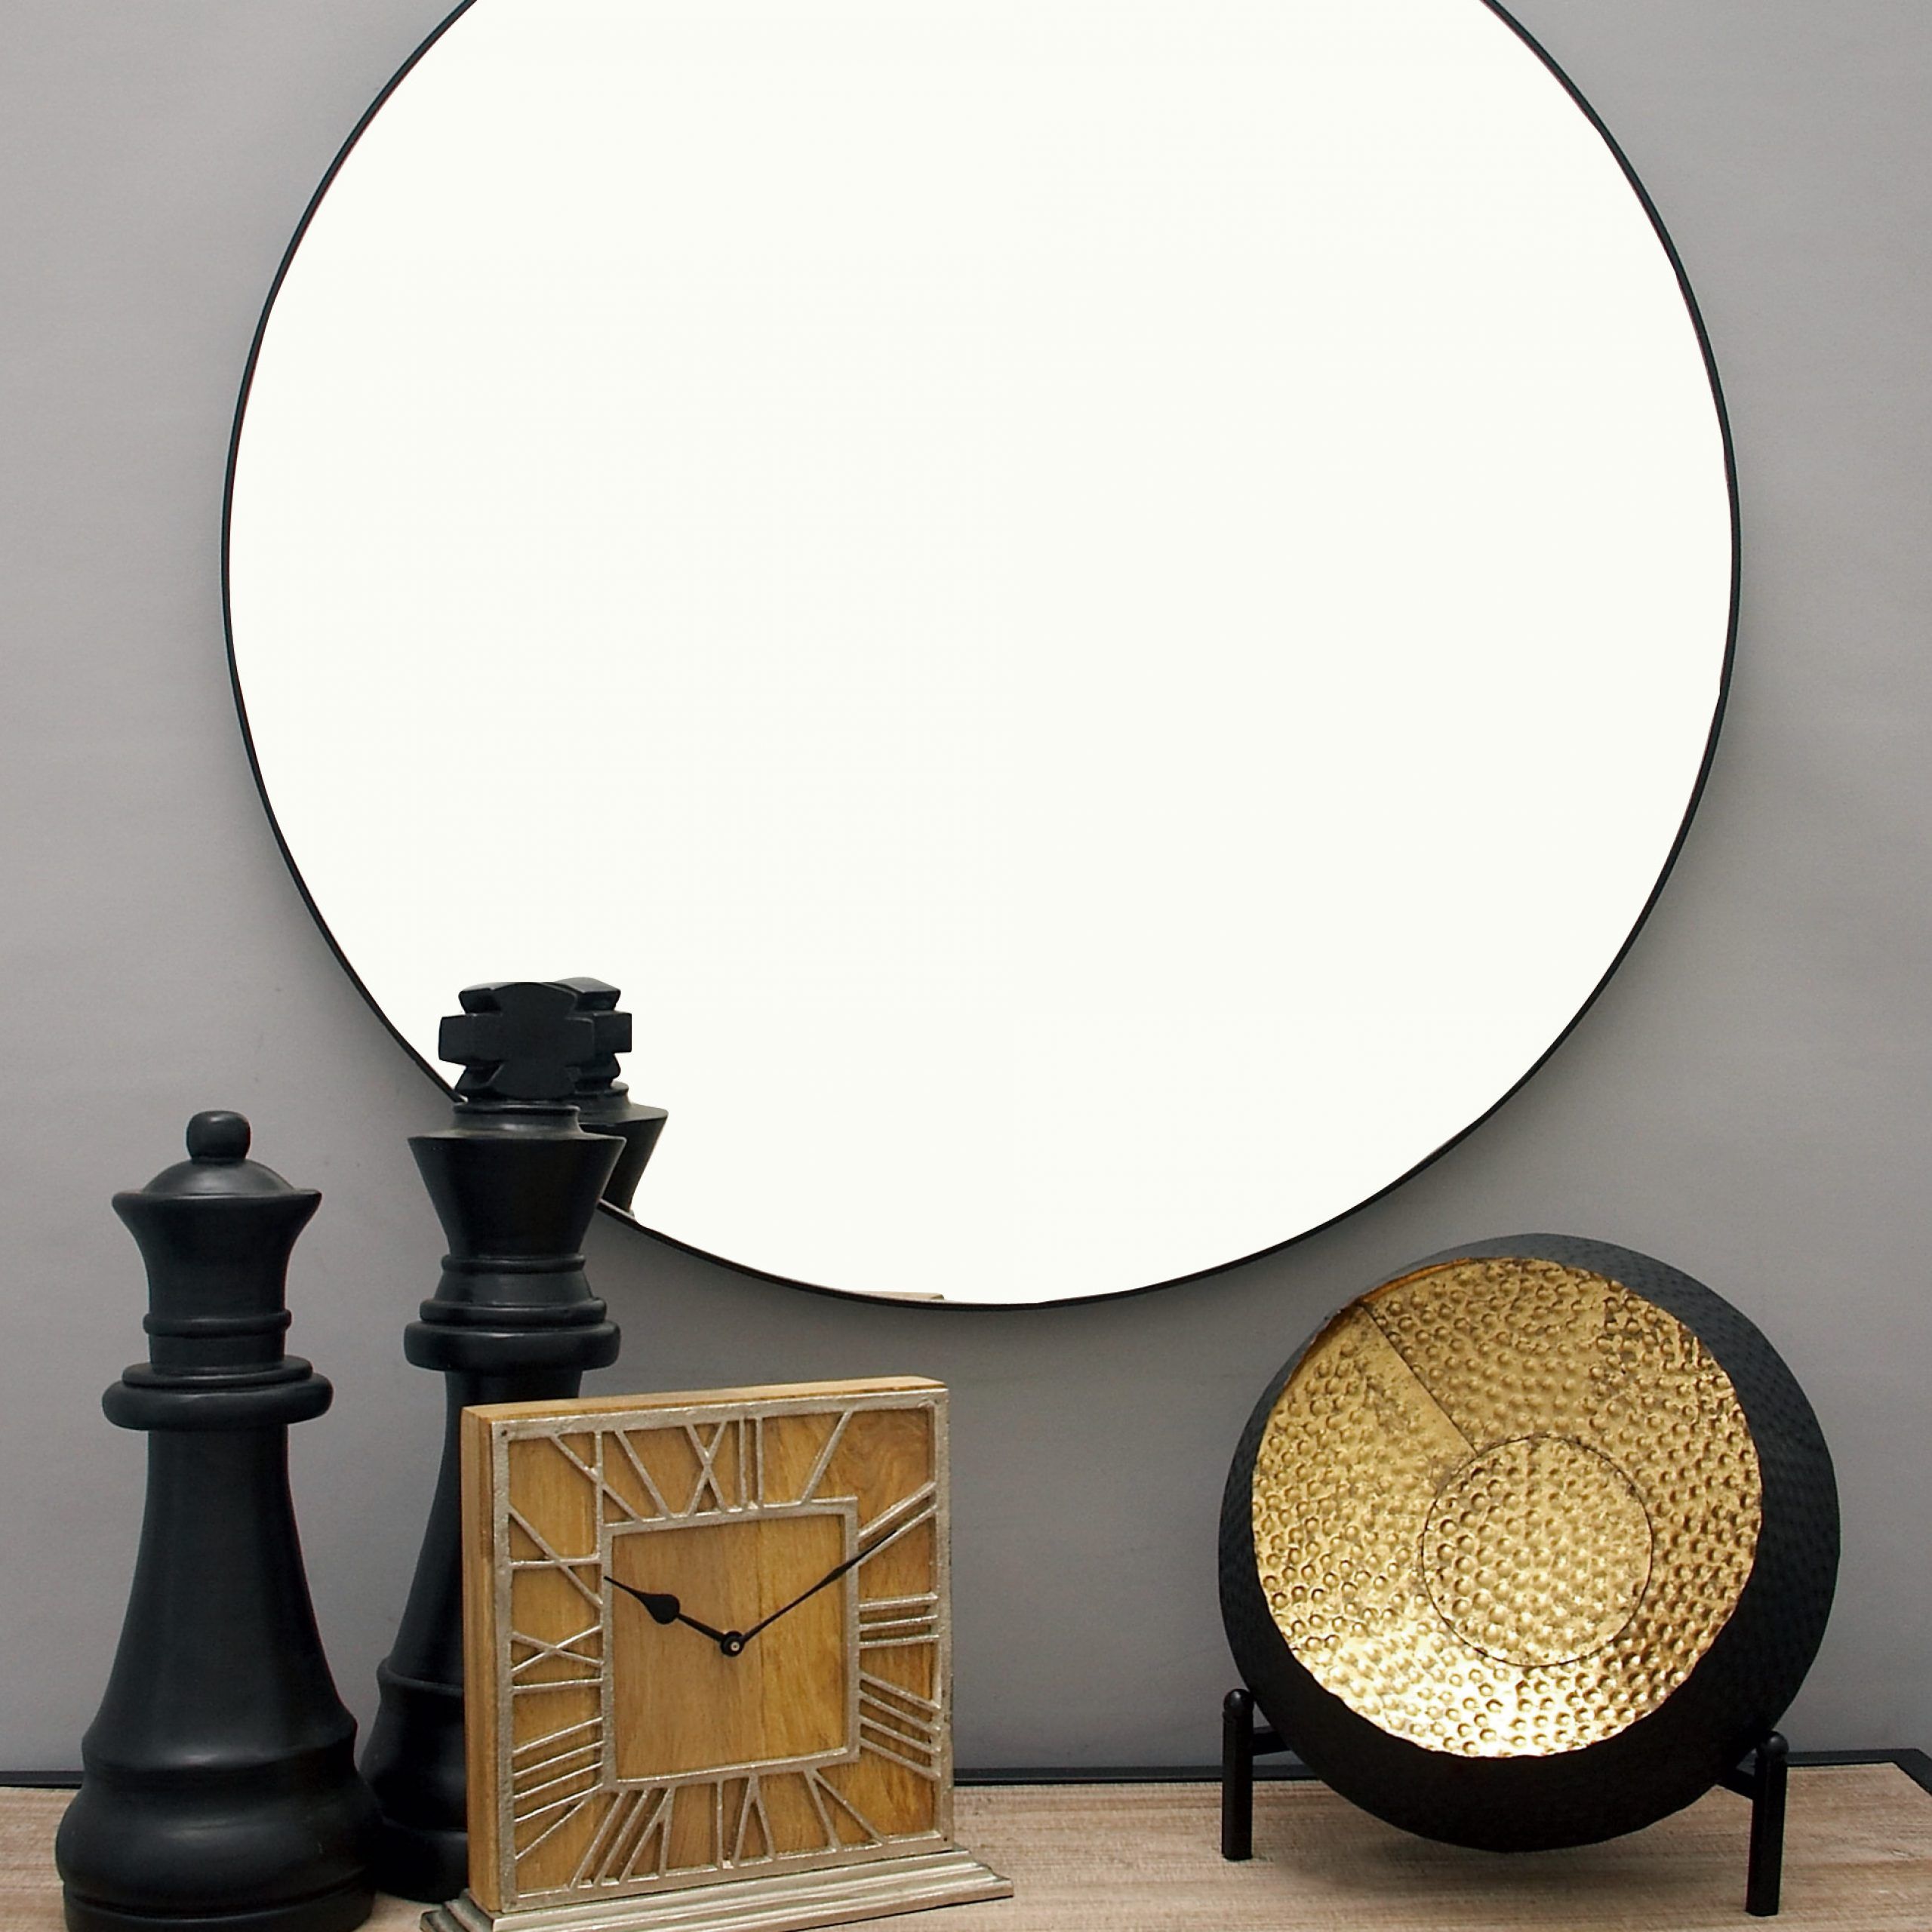 Decmode 36"d Round Accent Contemporary Mirror, Black, Set Of 1 With Regard To Matthias Round Accent Mirrors (View 1 of 15)